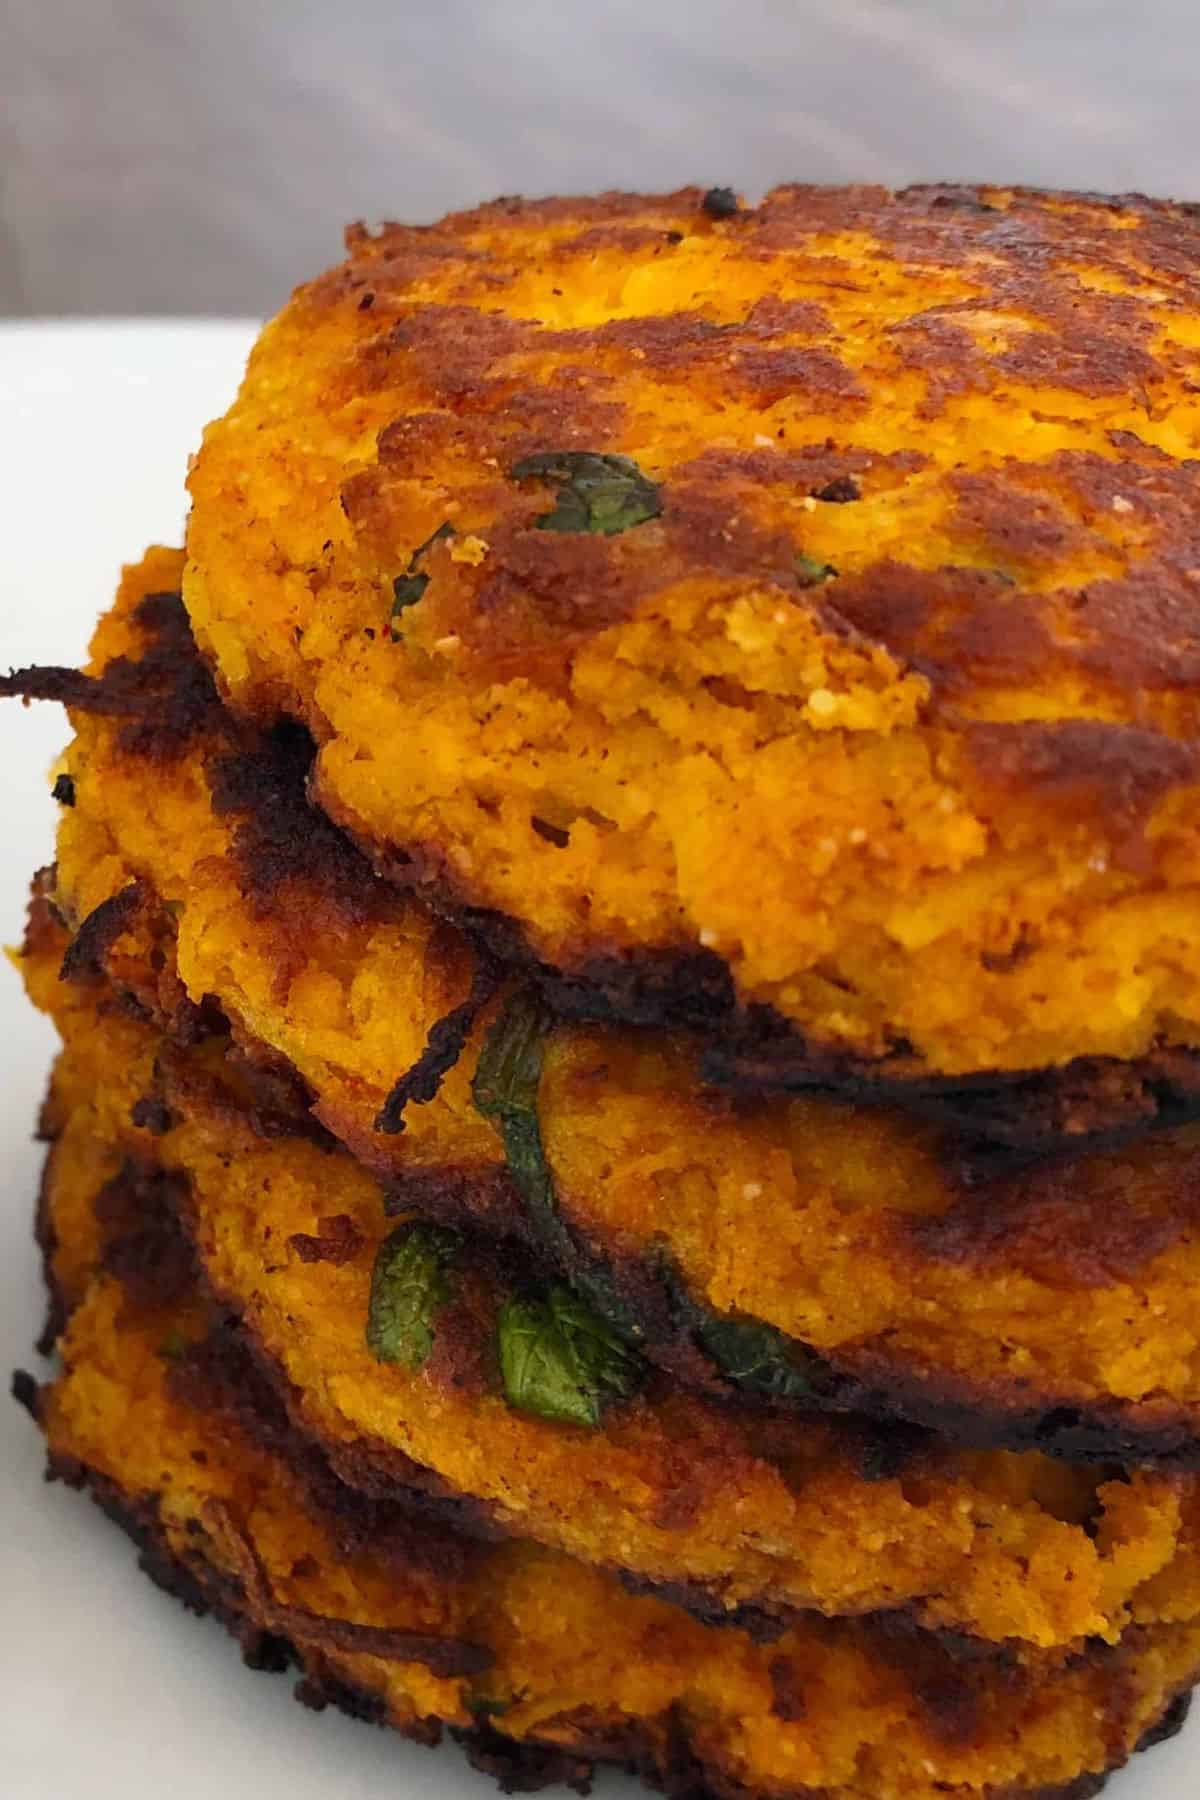 diabetic spaghetti squash fritters stacked on a white plate with a side dip.